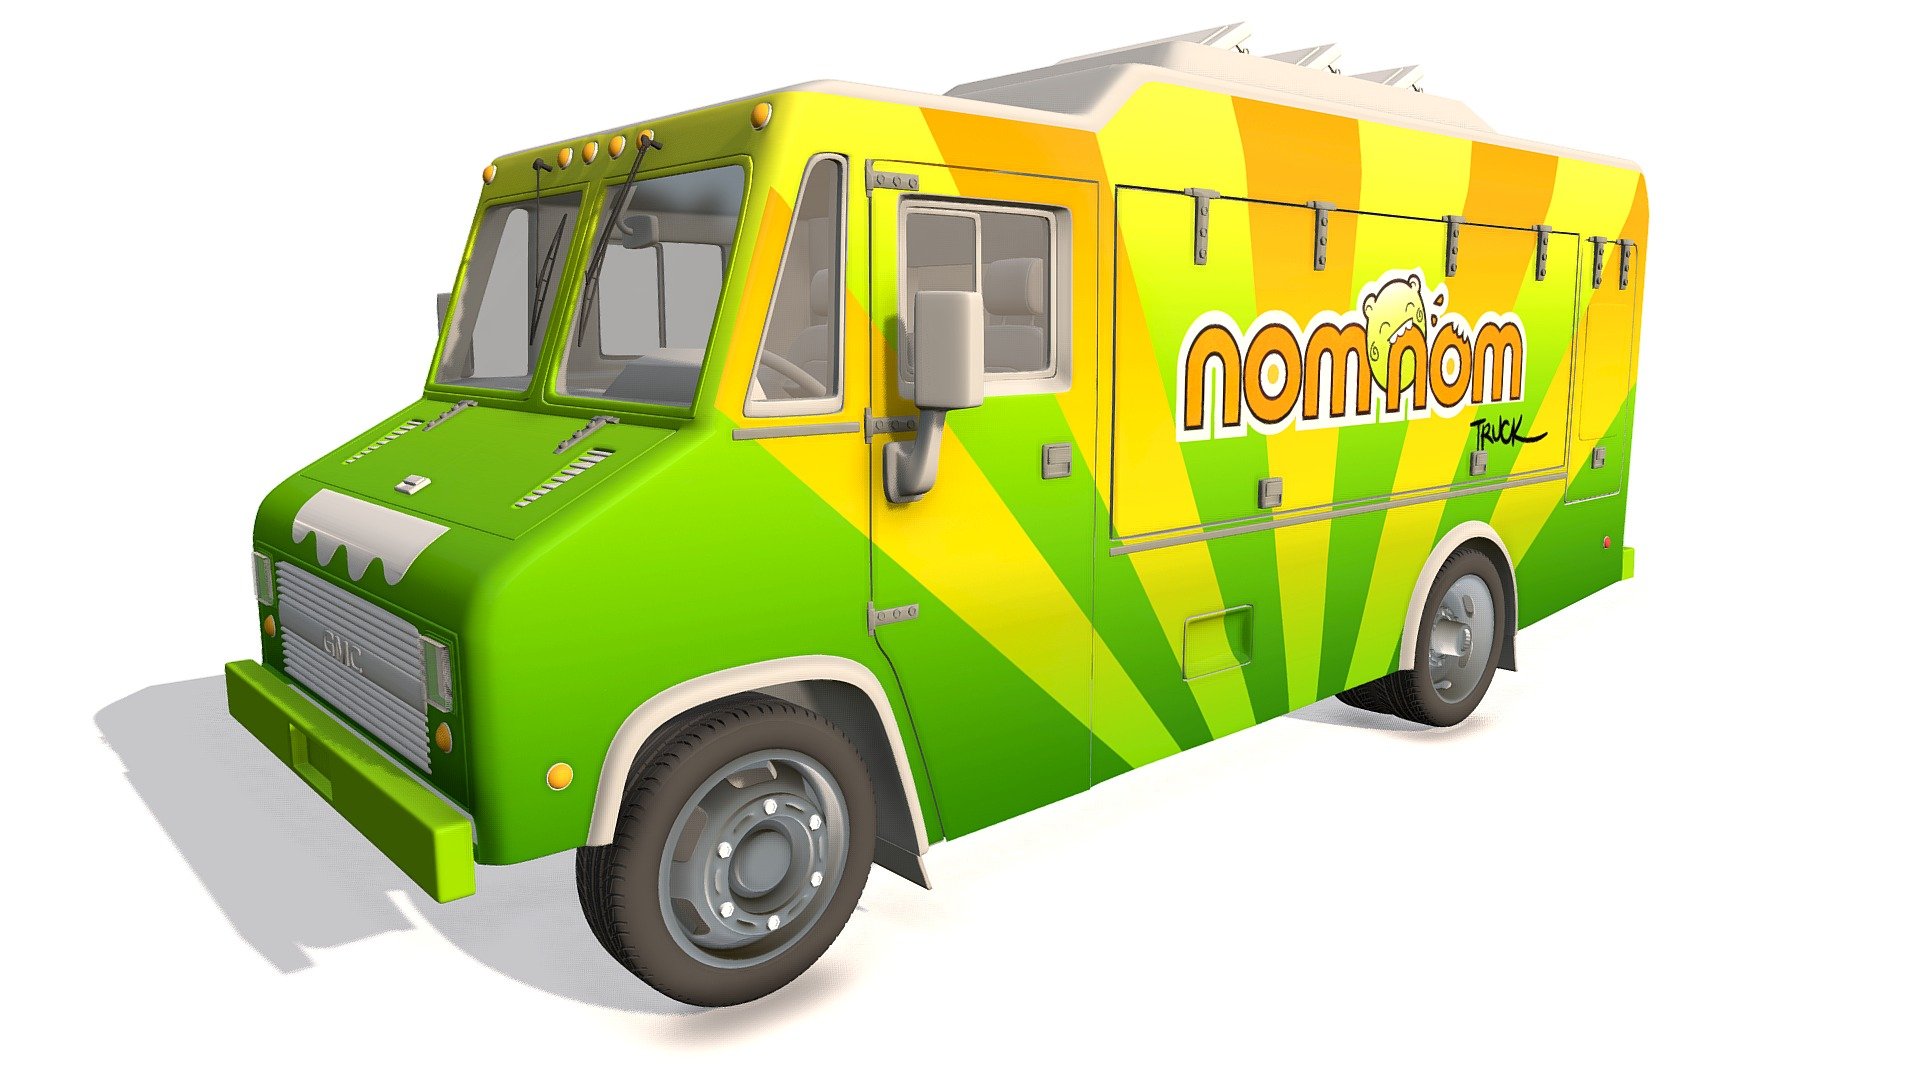 High quality 3d model of NomNom food truck with Semi-detailed interior.

If you need other 3d formats, please contact us 3d model